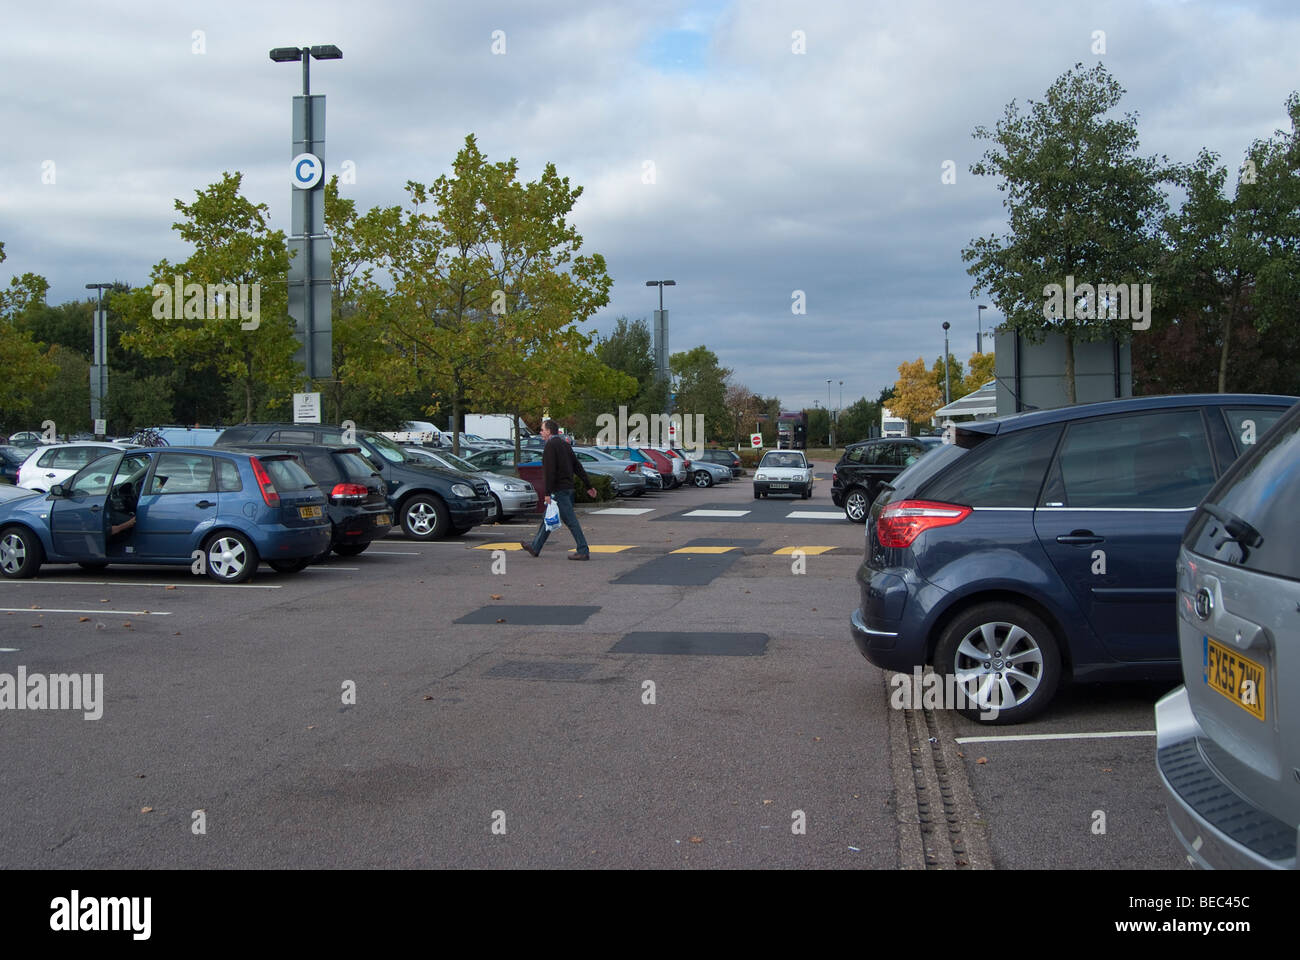 Car park at the South Mimms service station on the M25 motorway. Stock Photo